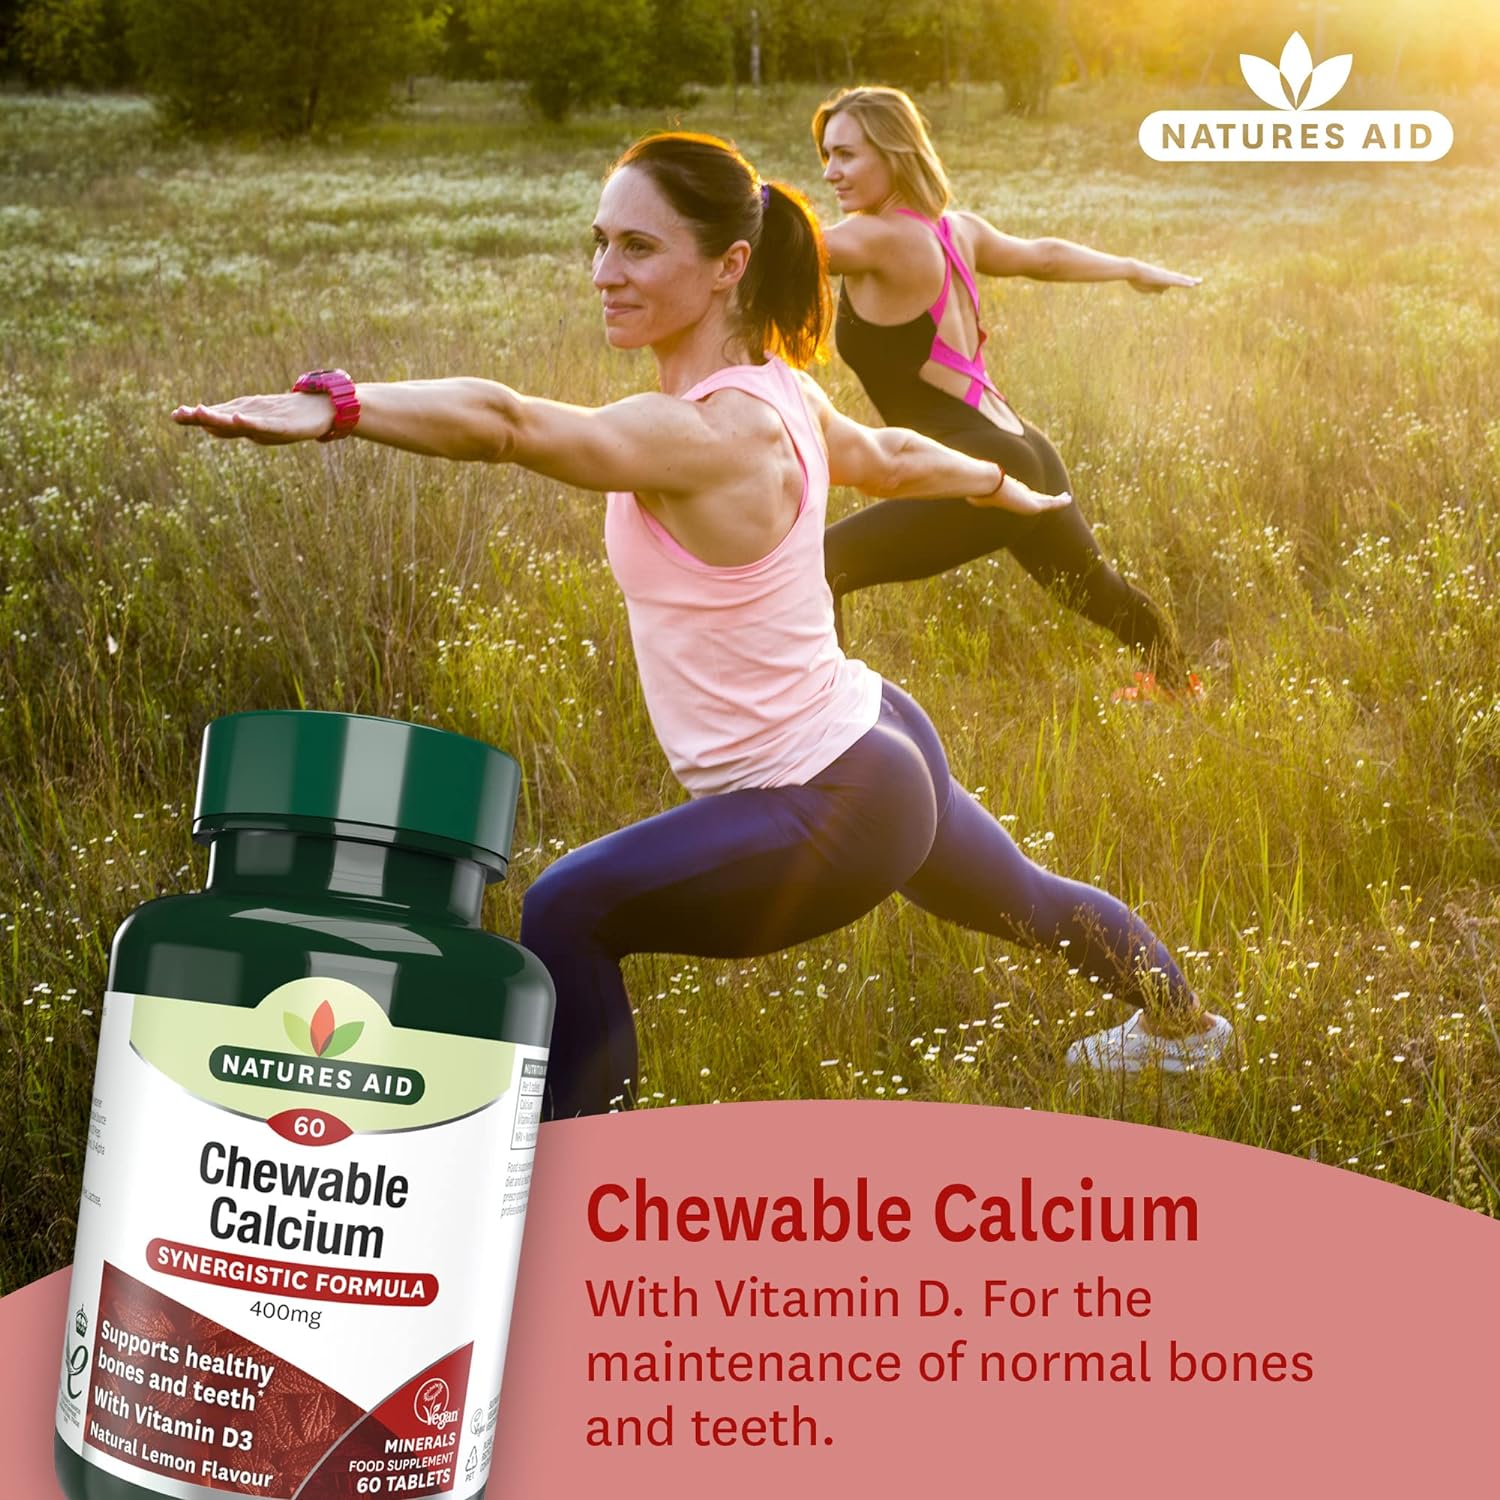 Calcium Chewable 400mg with Vitamin D3 60 Tablets